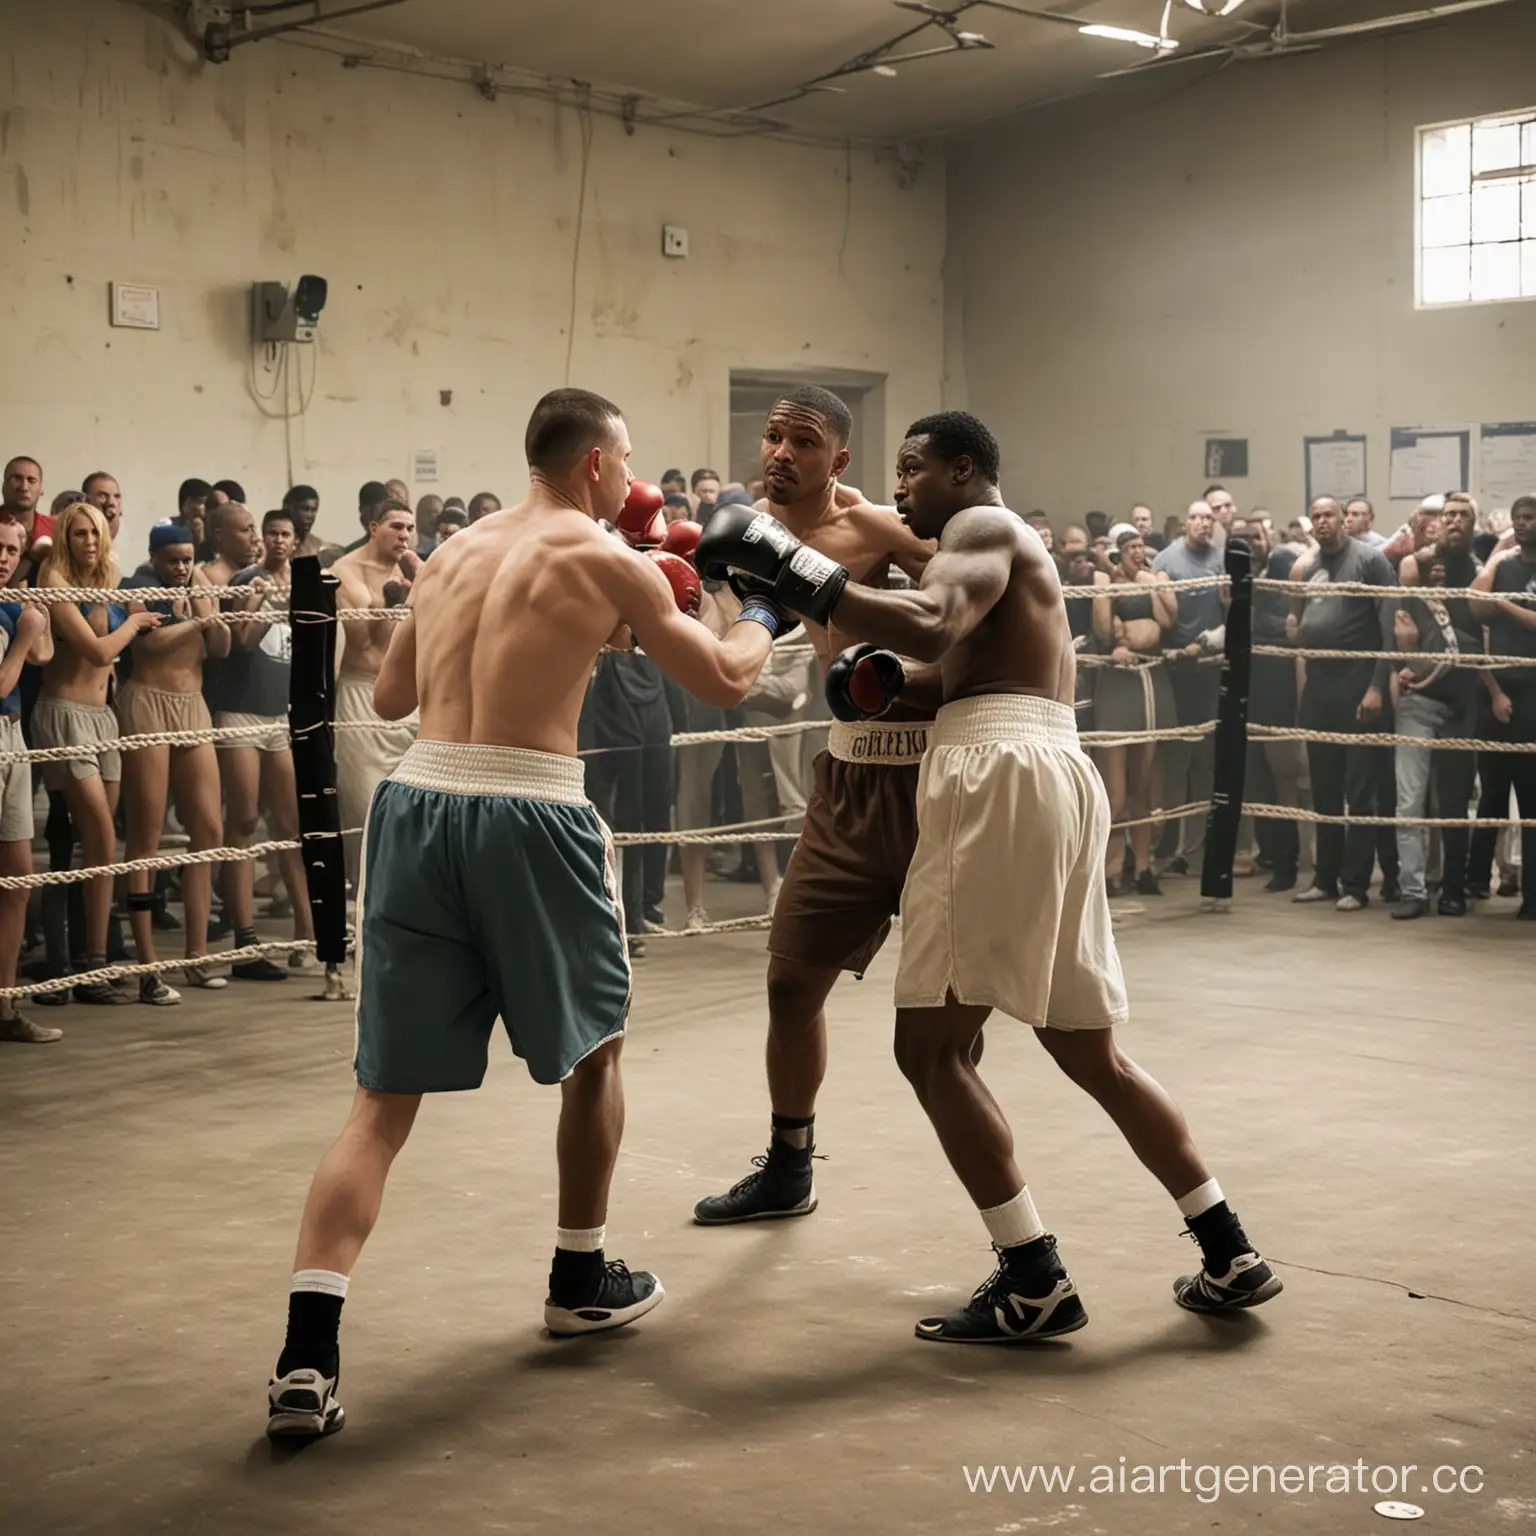 Inmates-Engaging-in-Intense-Boxing-Match